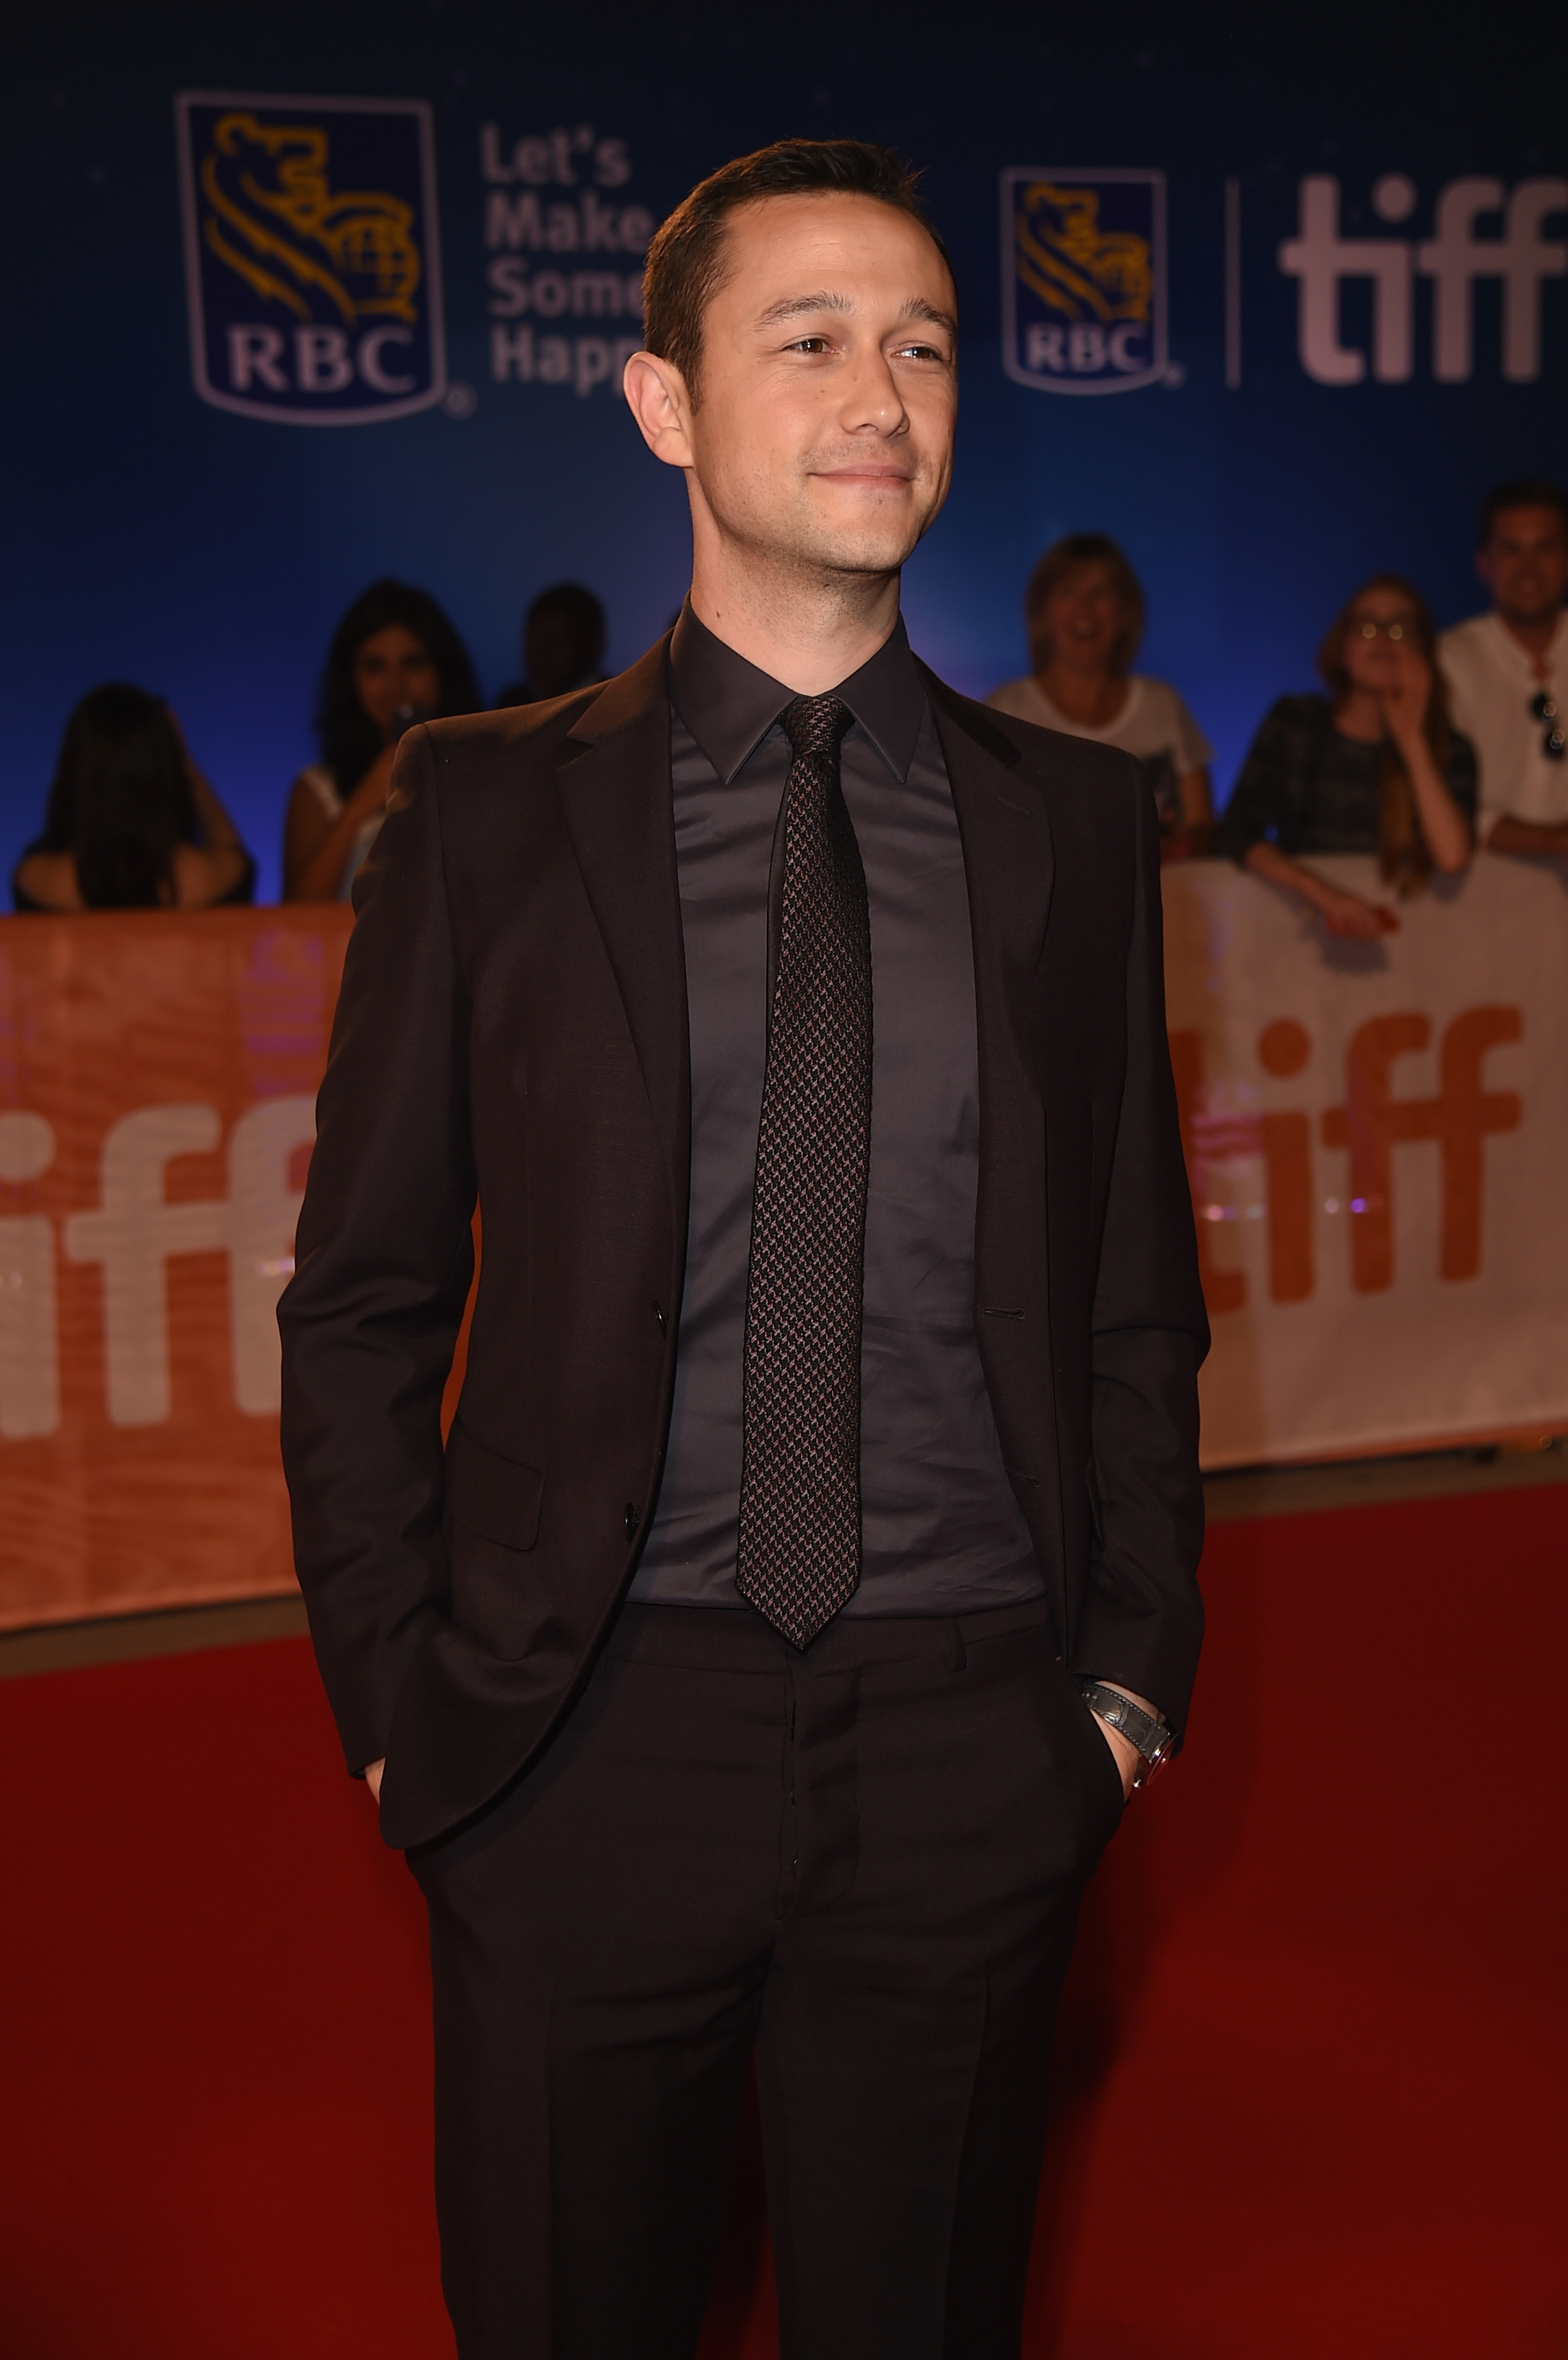 TORONTO, ON - SEPTEMBER 09:  Actor Joseph Gordon-Levitt attends the "Snowden" premiere during the 2016 Toronto International Film Festival at Roy Thomson Hall on September 9, 2016 in Toronto, Canada.  (Photo by Kevin Winter/Getty Images)